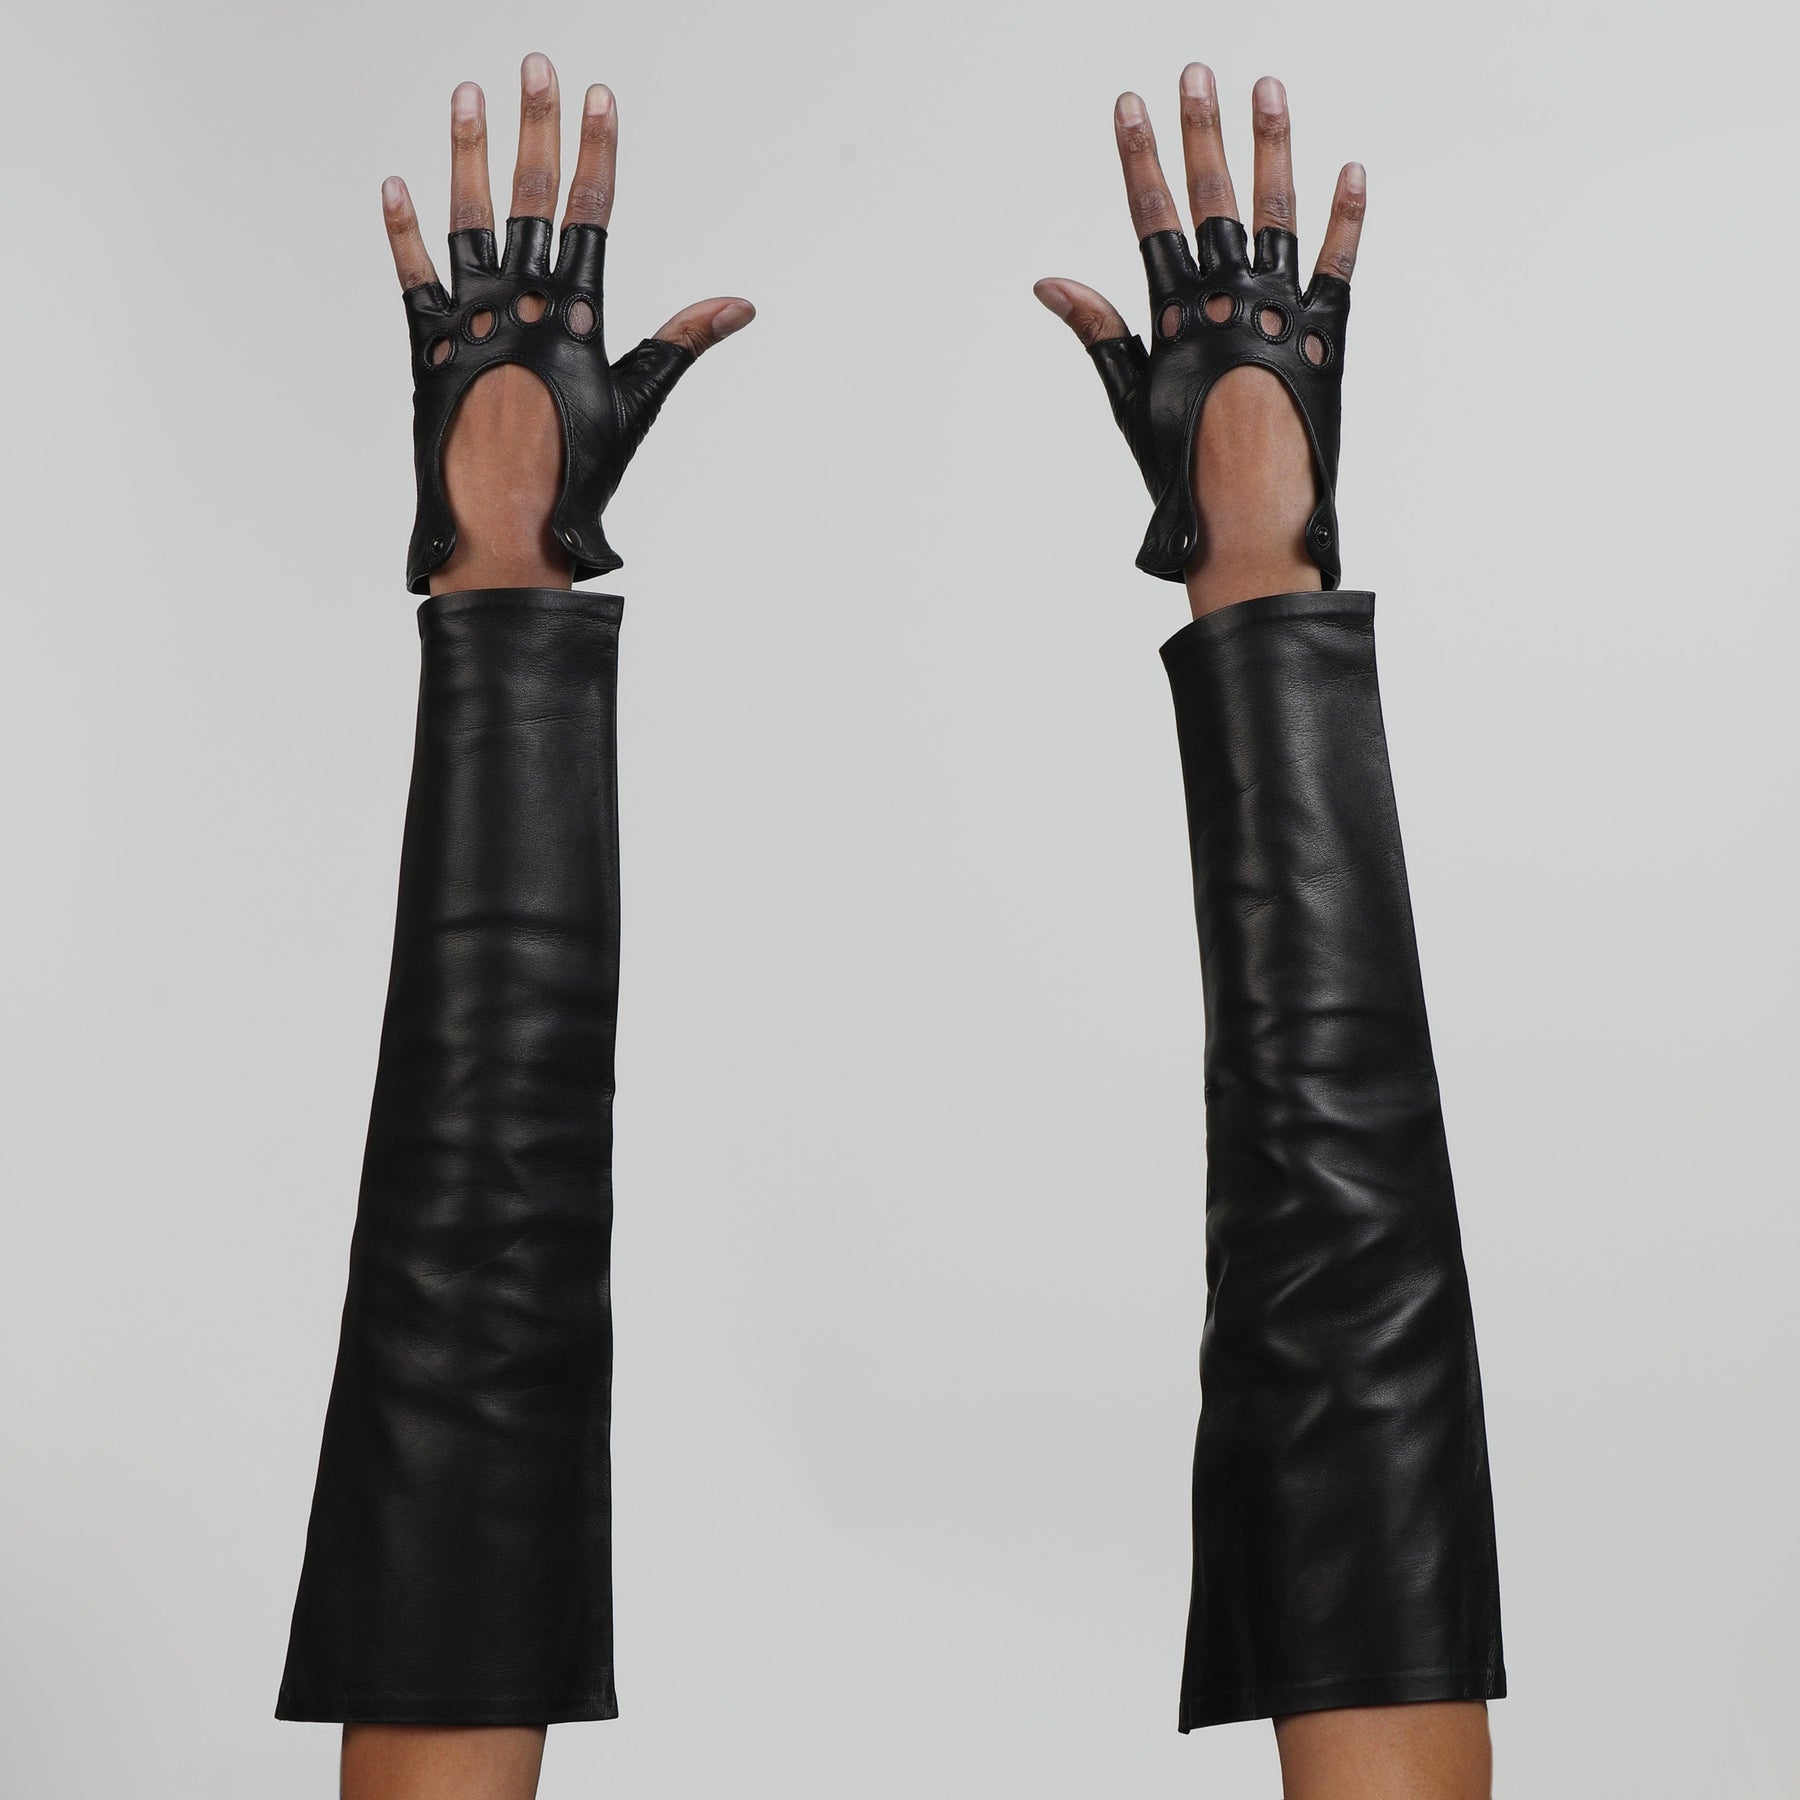 Love your look combo by Seymoure Gloves. Loveyourlook. Black Opera Gloves.